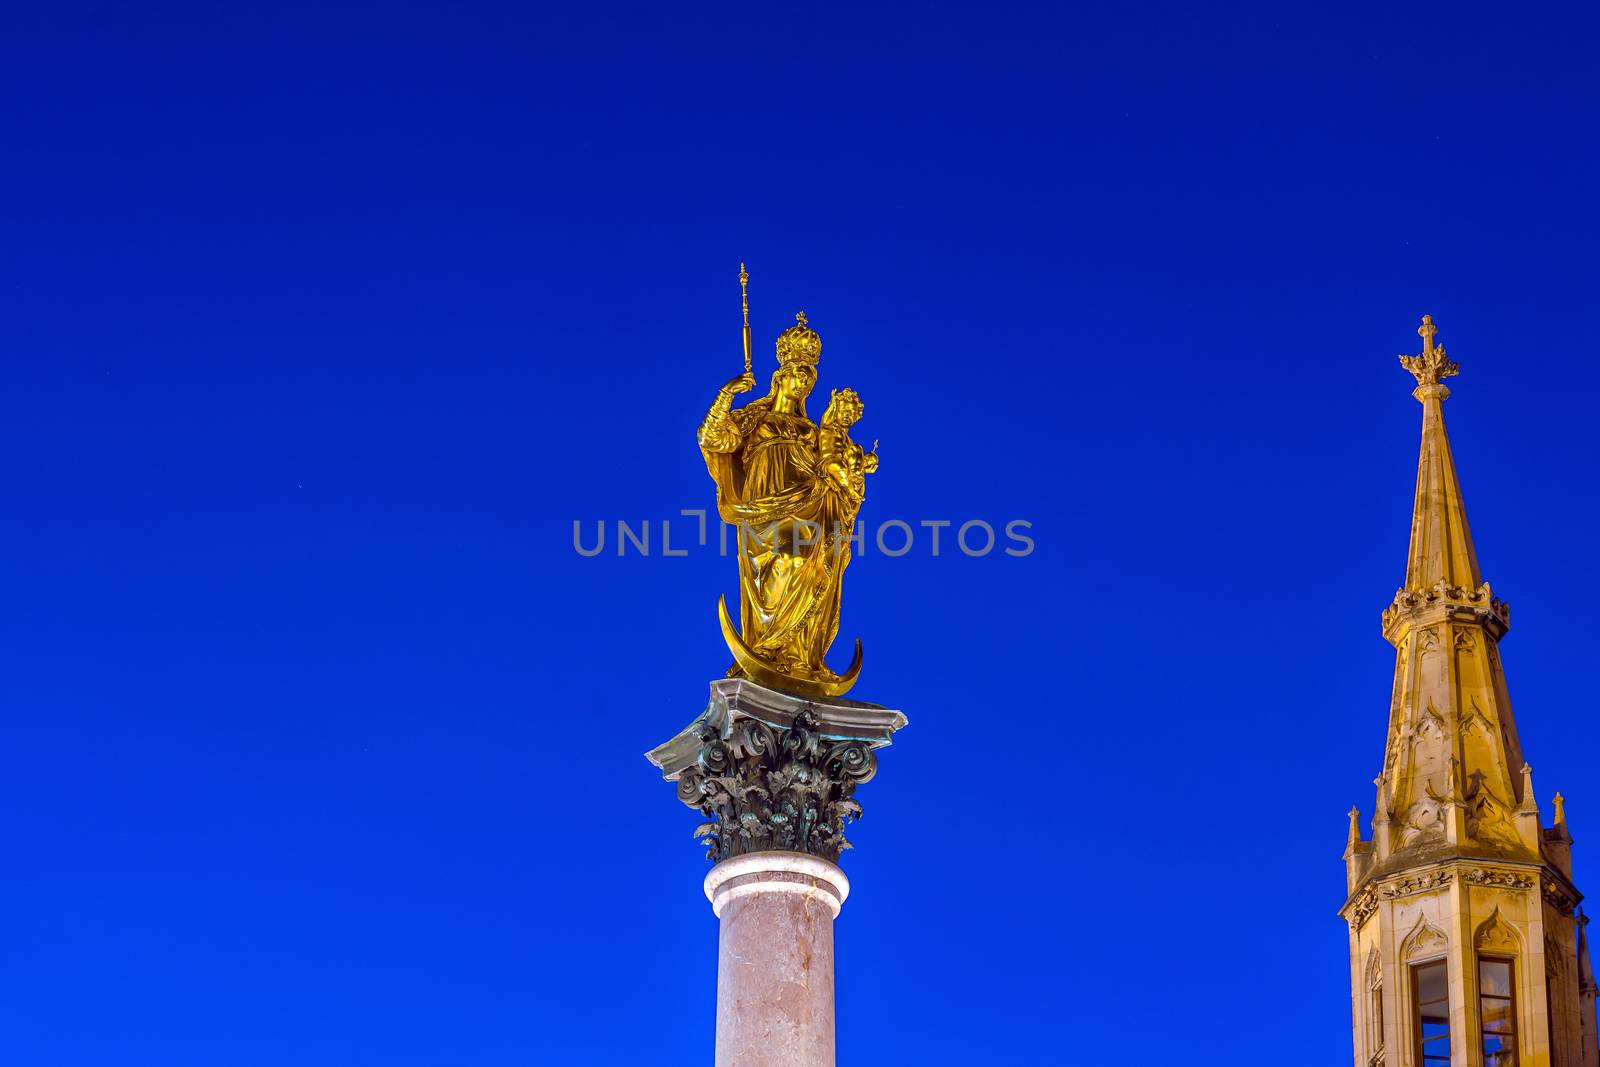 Steeple of the Peace Column with famous golden Angel of Peace statue in Munich, Germany